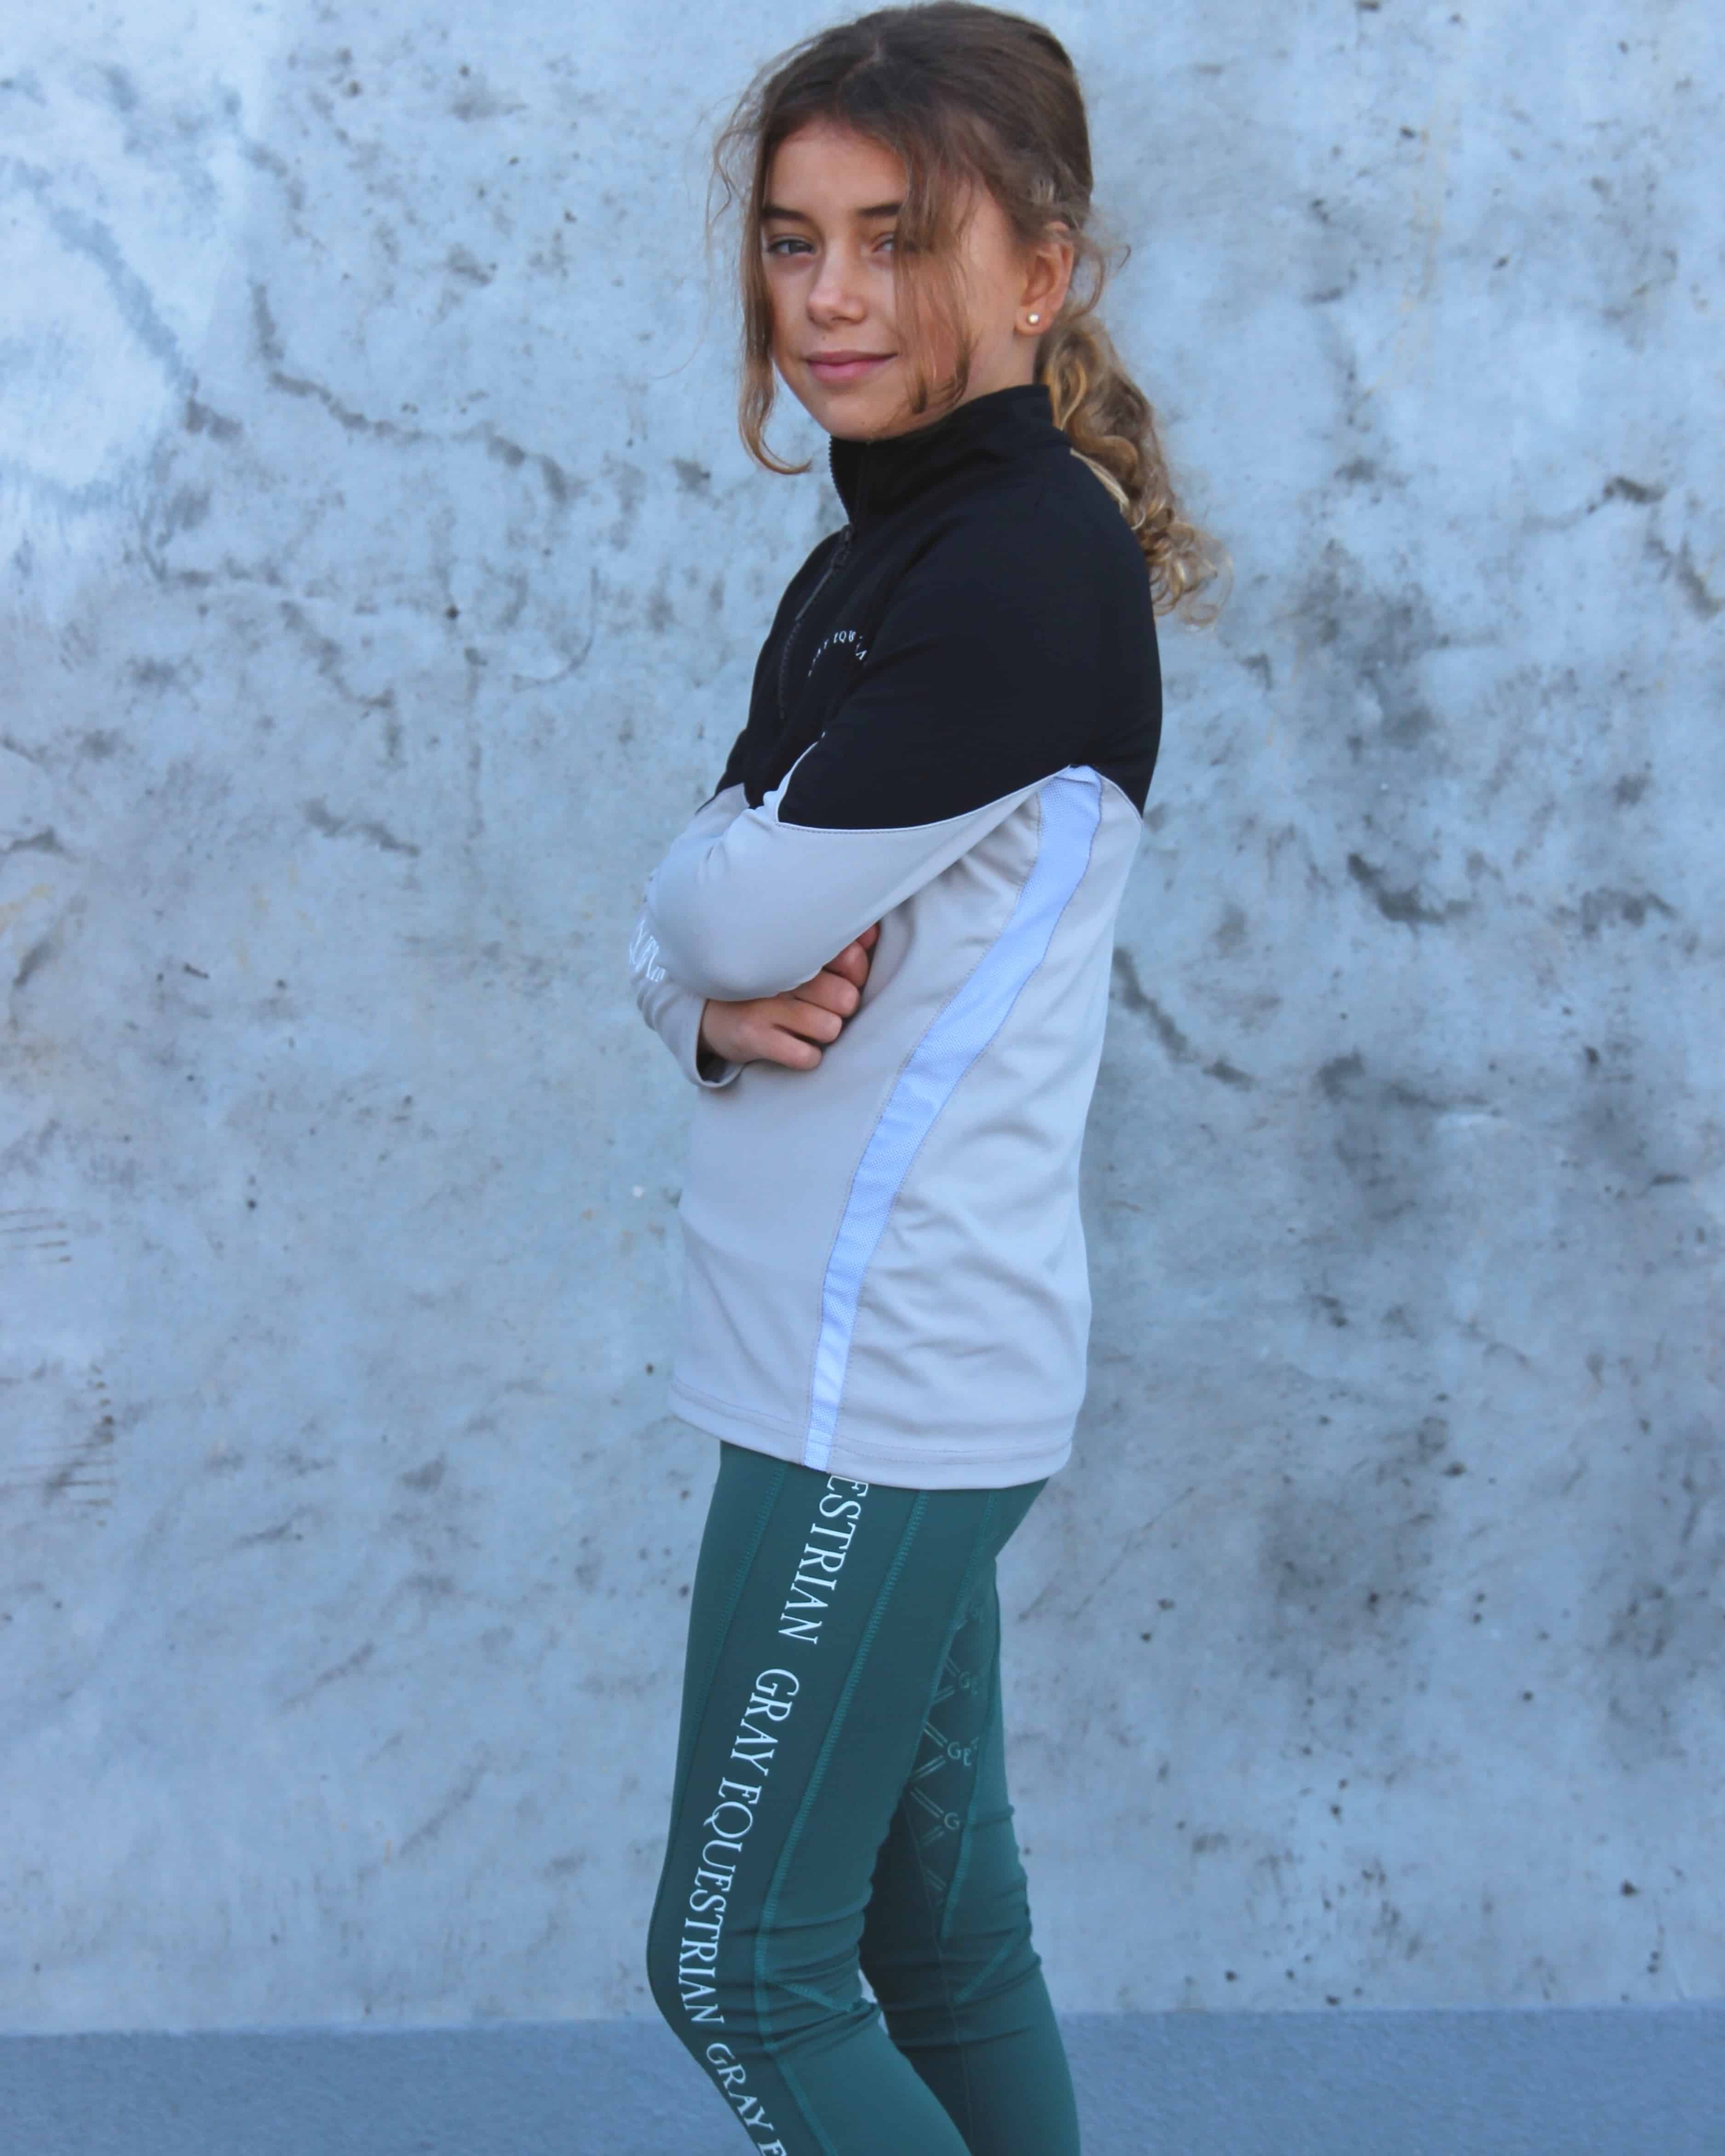 Our child model wearing our black and grey two toned base layer and green riding leggings.